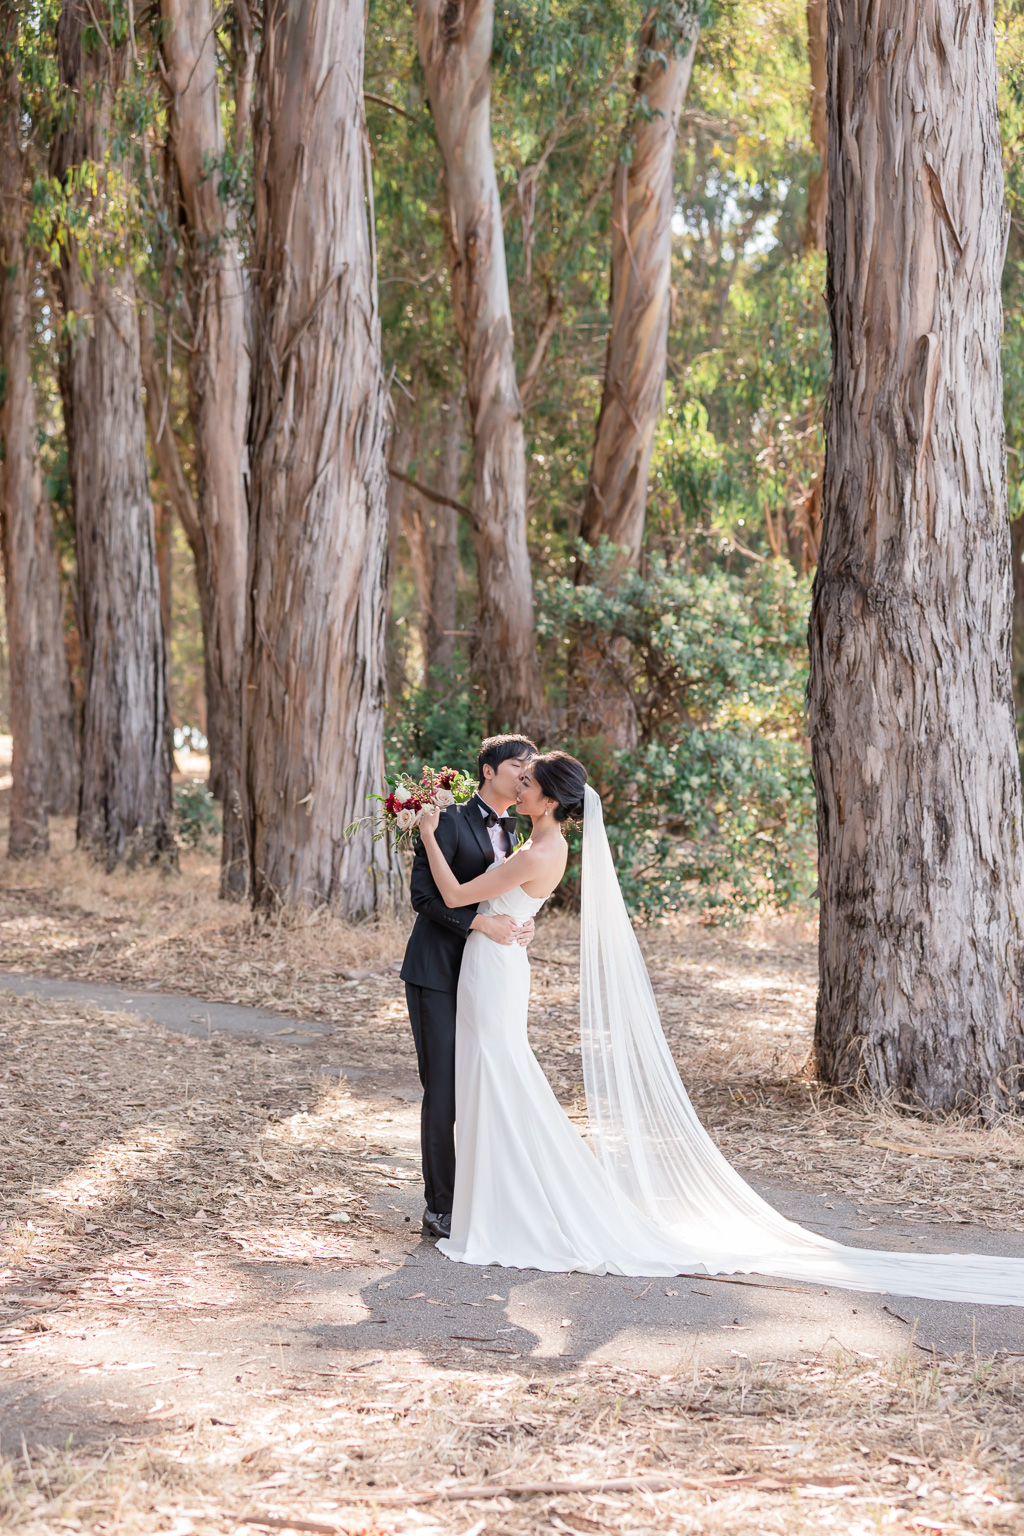 San Mateo beautiful wedding venue for outdoor bride and groom portraits